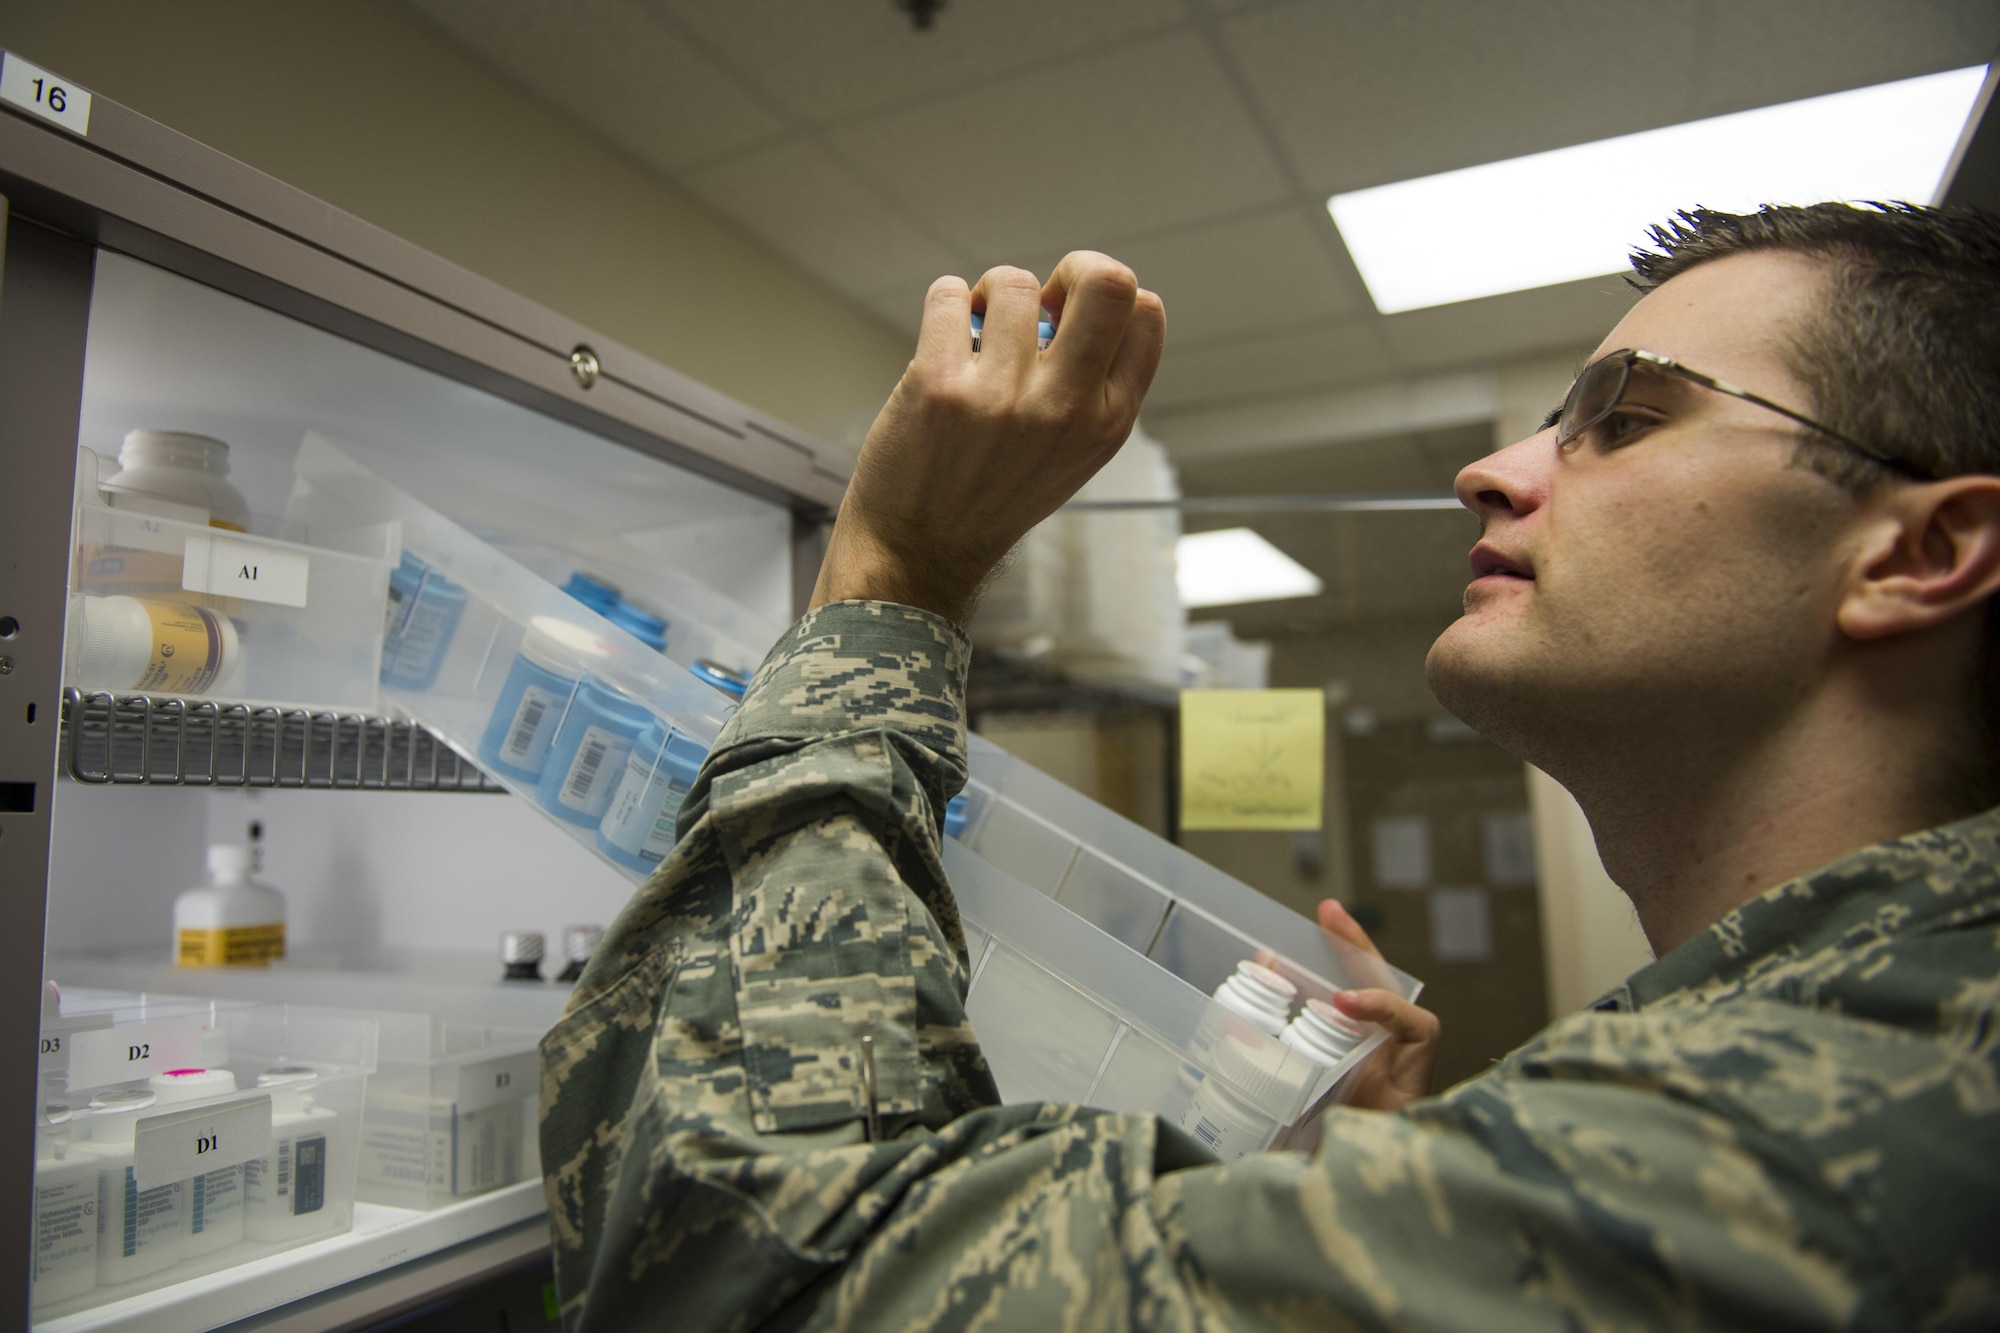 Capt. Kristofer Yaple, chief of pharmacy services for the 1st Special Operations Medical Support Squadron, verifies a medication for a prescription at Hurlburt Field, Fla., Jan. 10, 2017. The 1st SOMDSS typically fills more than 900 prescriptions a day. (U.S. Air Force photo by Airman 1st Class Joseph Pick)